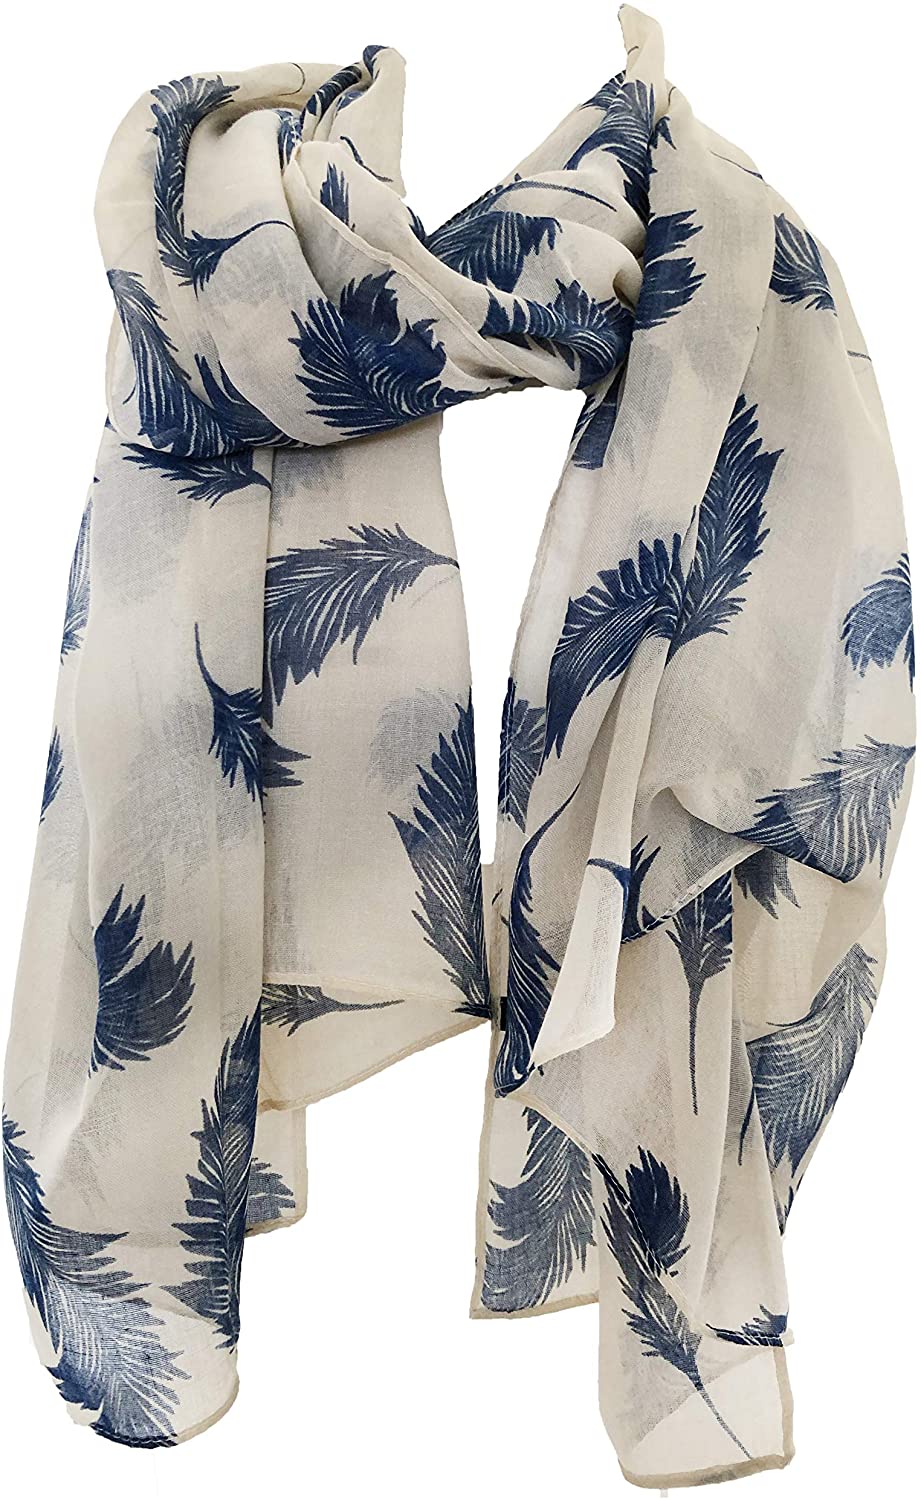 Pamper Yourself Now Beige with Blue Feathers, Long Scarf, Soft Ladies Fashion London